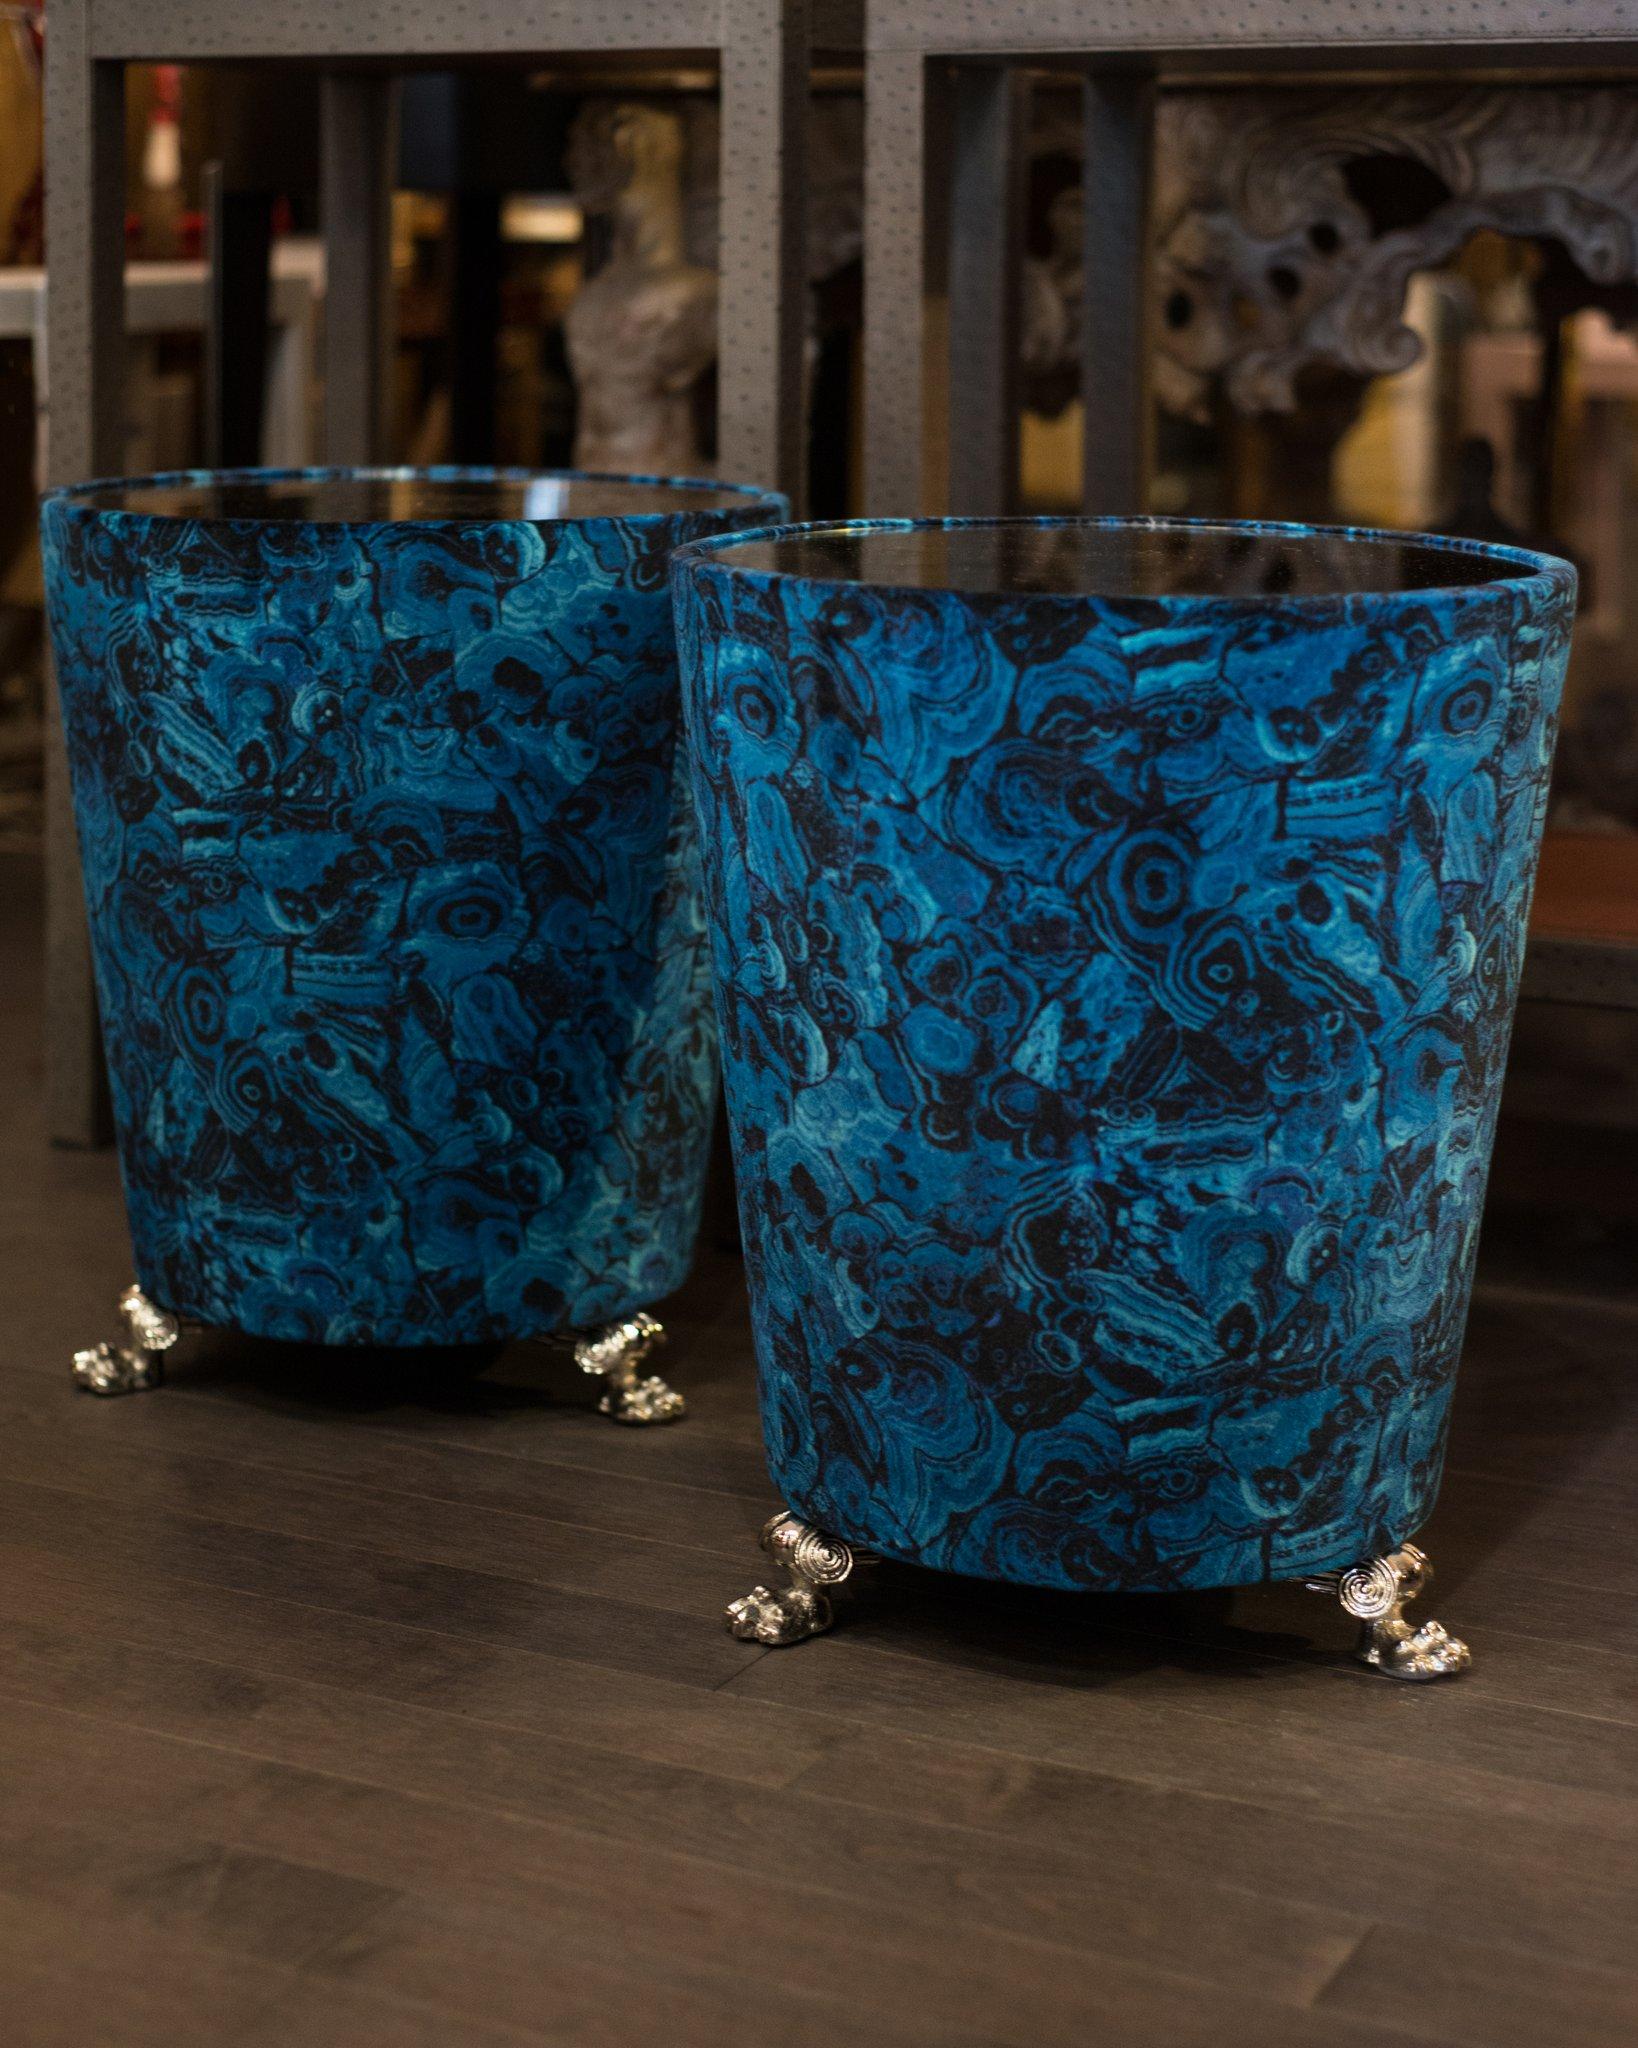 Introducing a new exclusive design from Studio Maison Nurita, extravagant handmade side tables in blue agate velvet. Perfection is in the details and these rich tables are upholstered in a Nobilis fabric, with antique mirrored tops and elegant